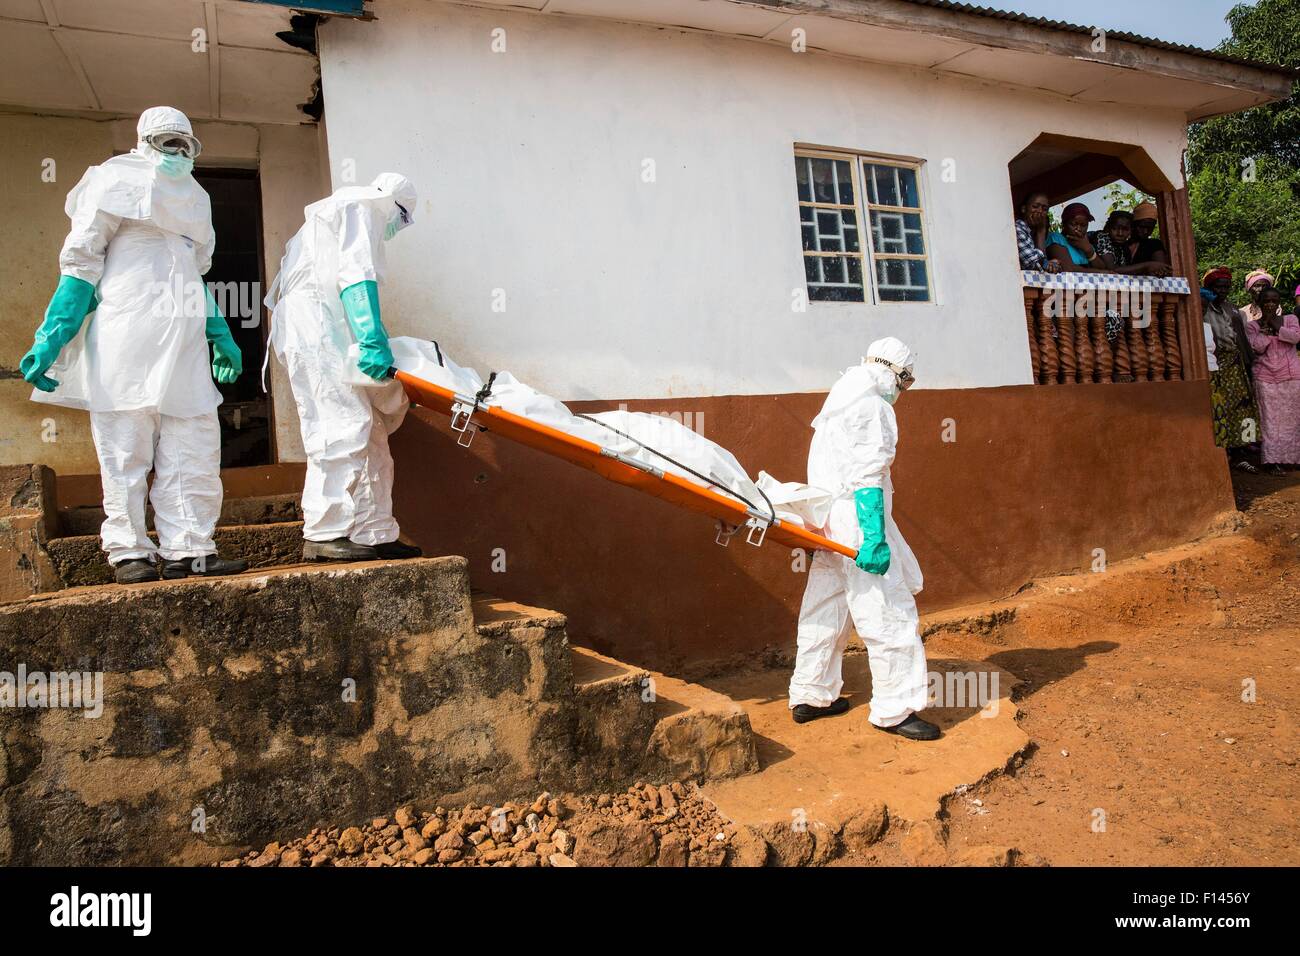 International Federation of Red Cross volunteer burial teams remove the body of an Ebola victim from a home before taking them for burial December 24, 2014 in Freetown, Sierra Leone. Stock Photo